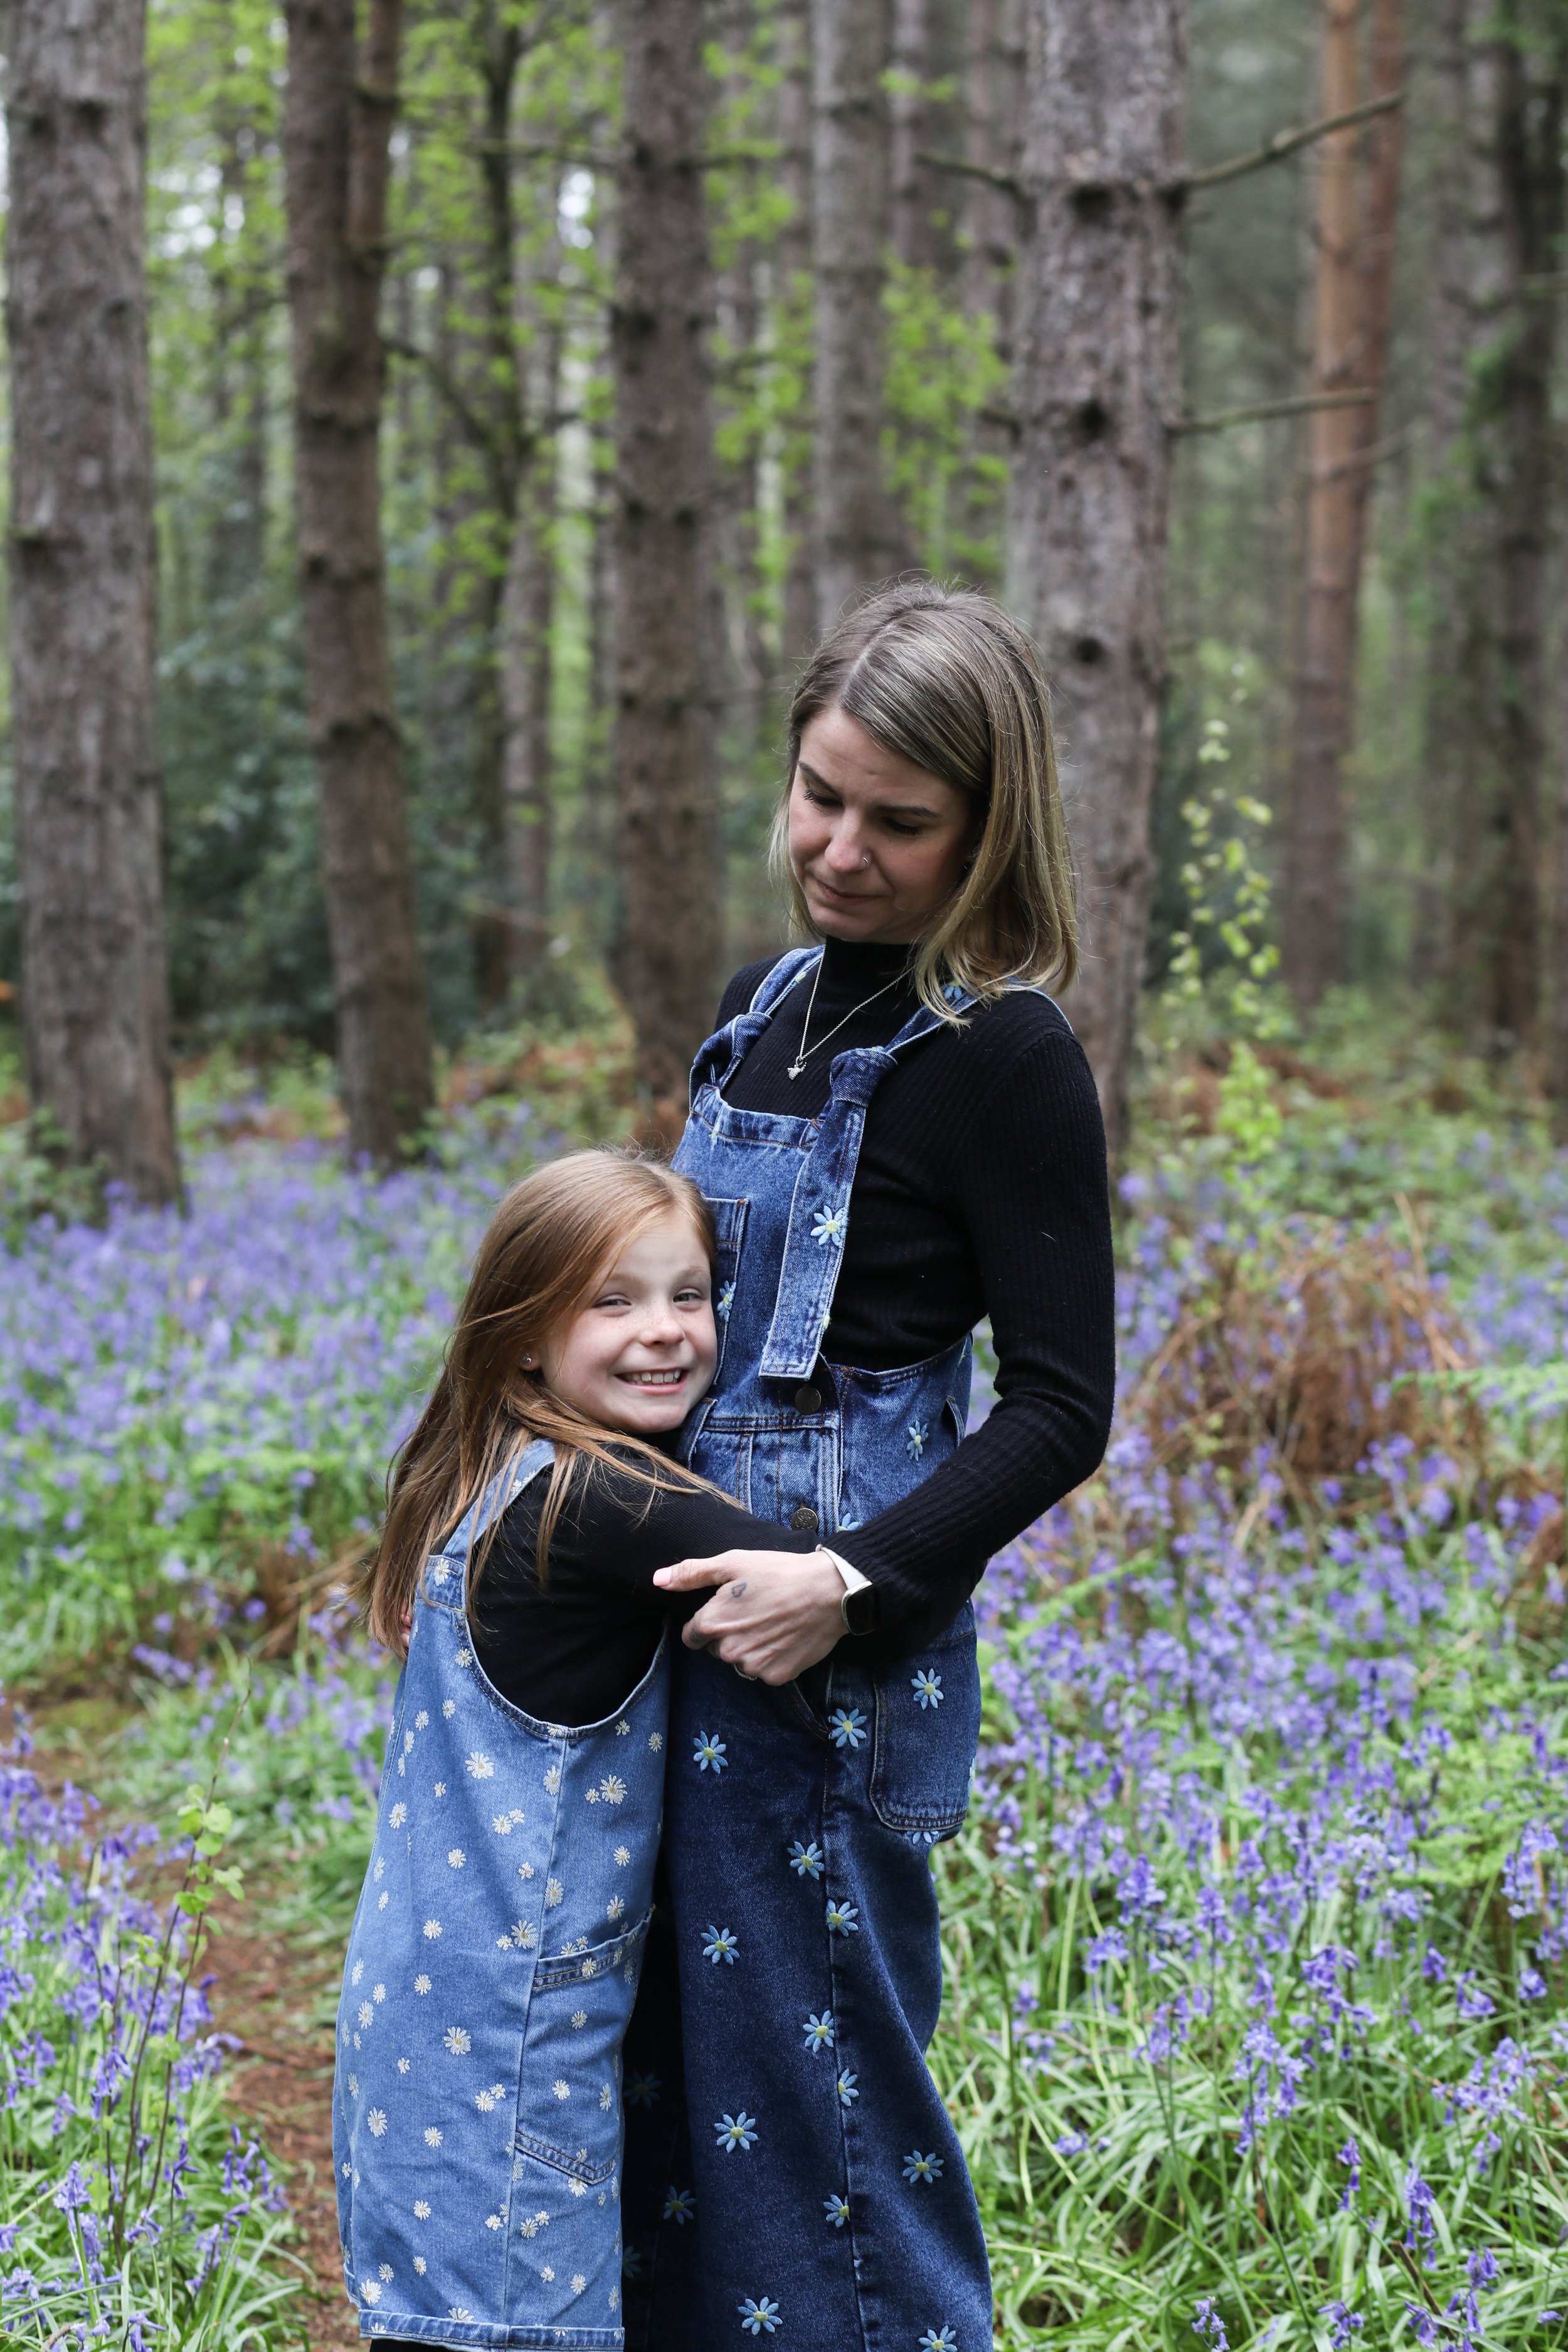 MUM AND DAUGHTER PHOTO SHOOT IN THE BLUEBELLS | BERKSHIRE PORTRAIT SHOOTS39 choice .JPG